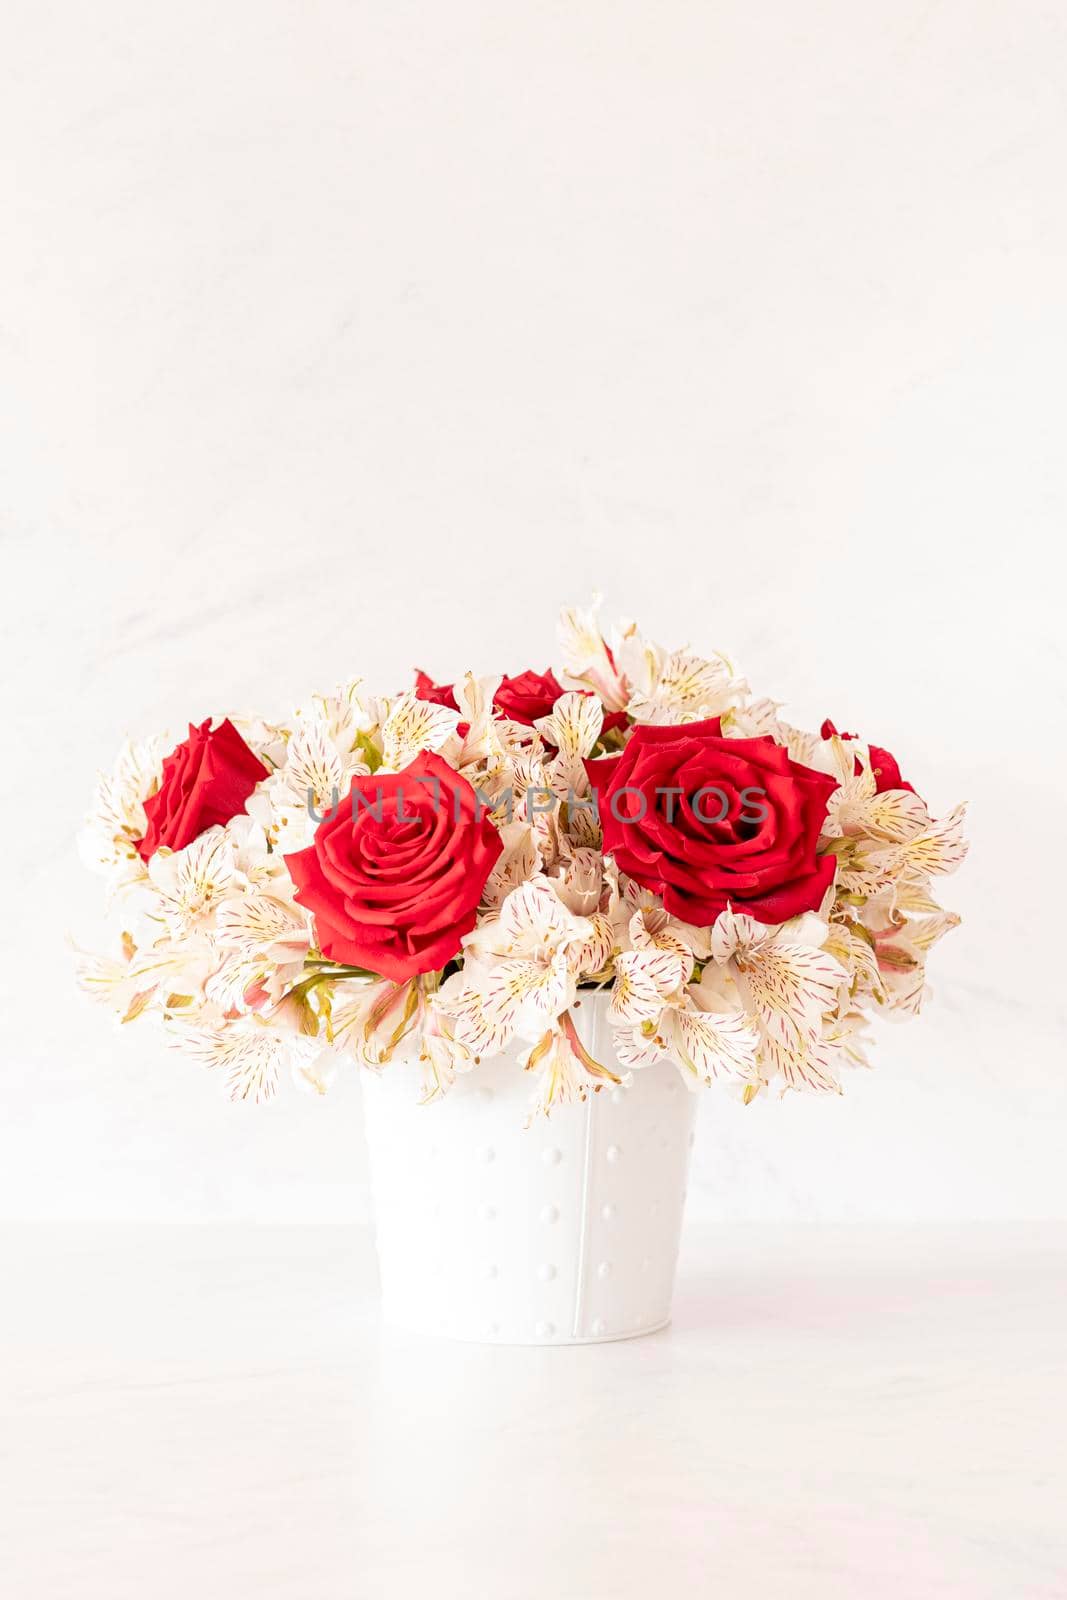 Floral arrangement composed of red roses for spring by eagg13